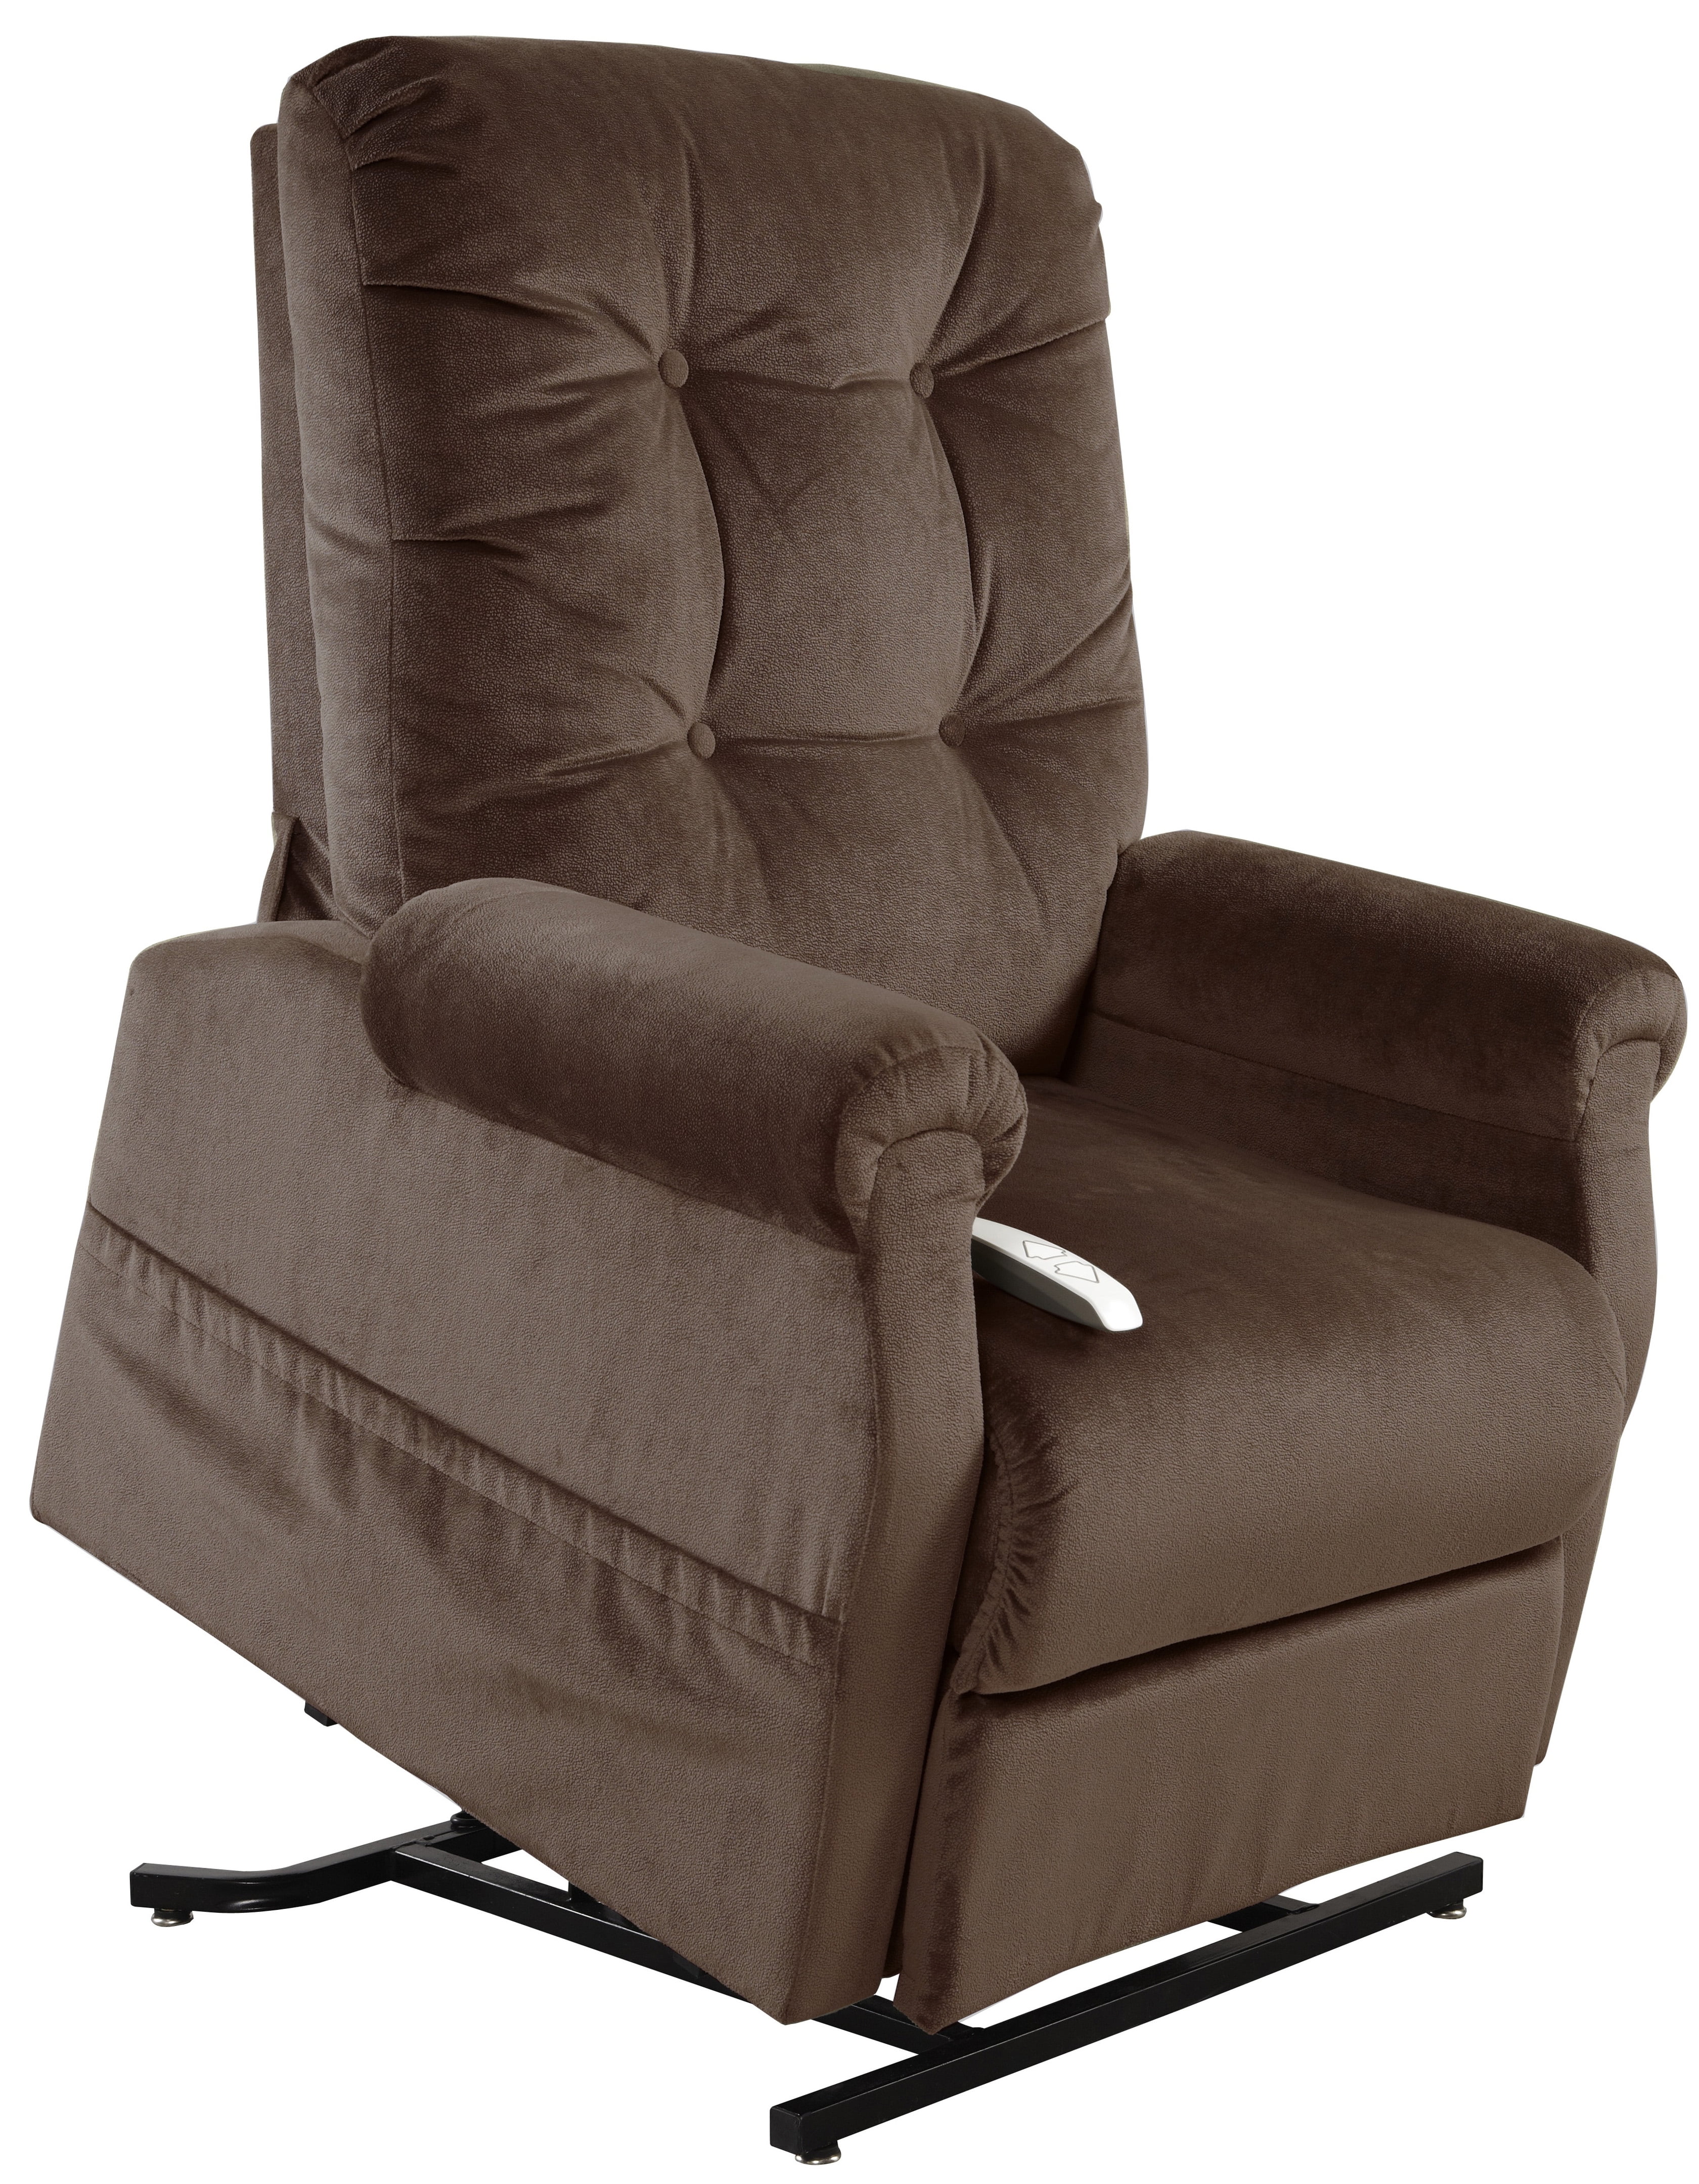 Easy Comfort AS4001 3position Electric Lift Chair Reclinerchocolate